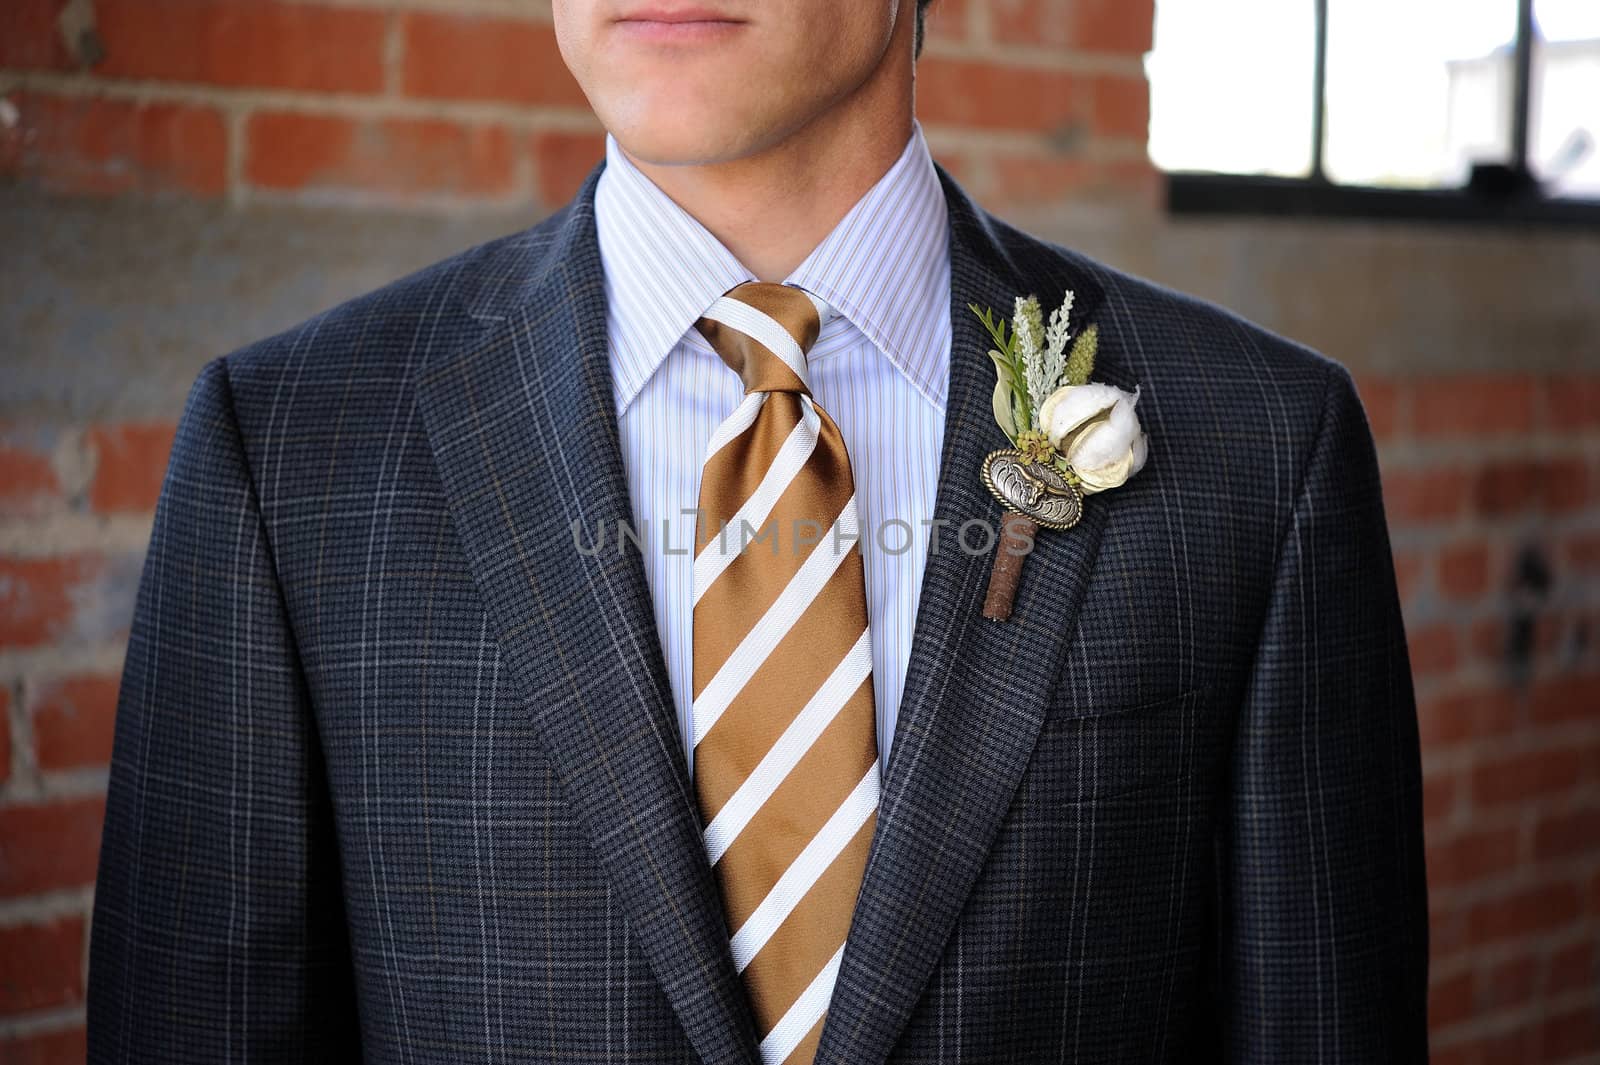 Image of a Gray Plaid suit with tan stripes and boutonniere